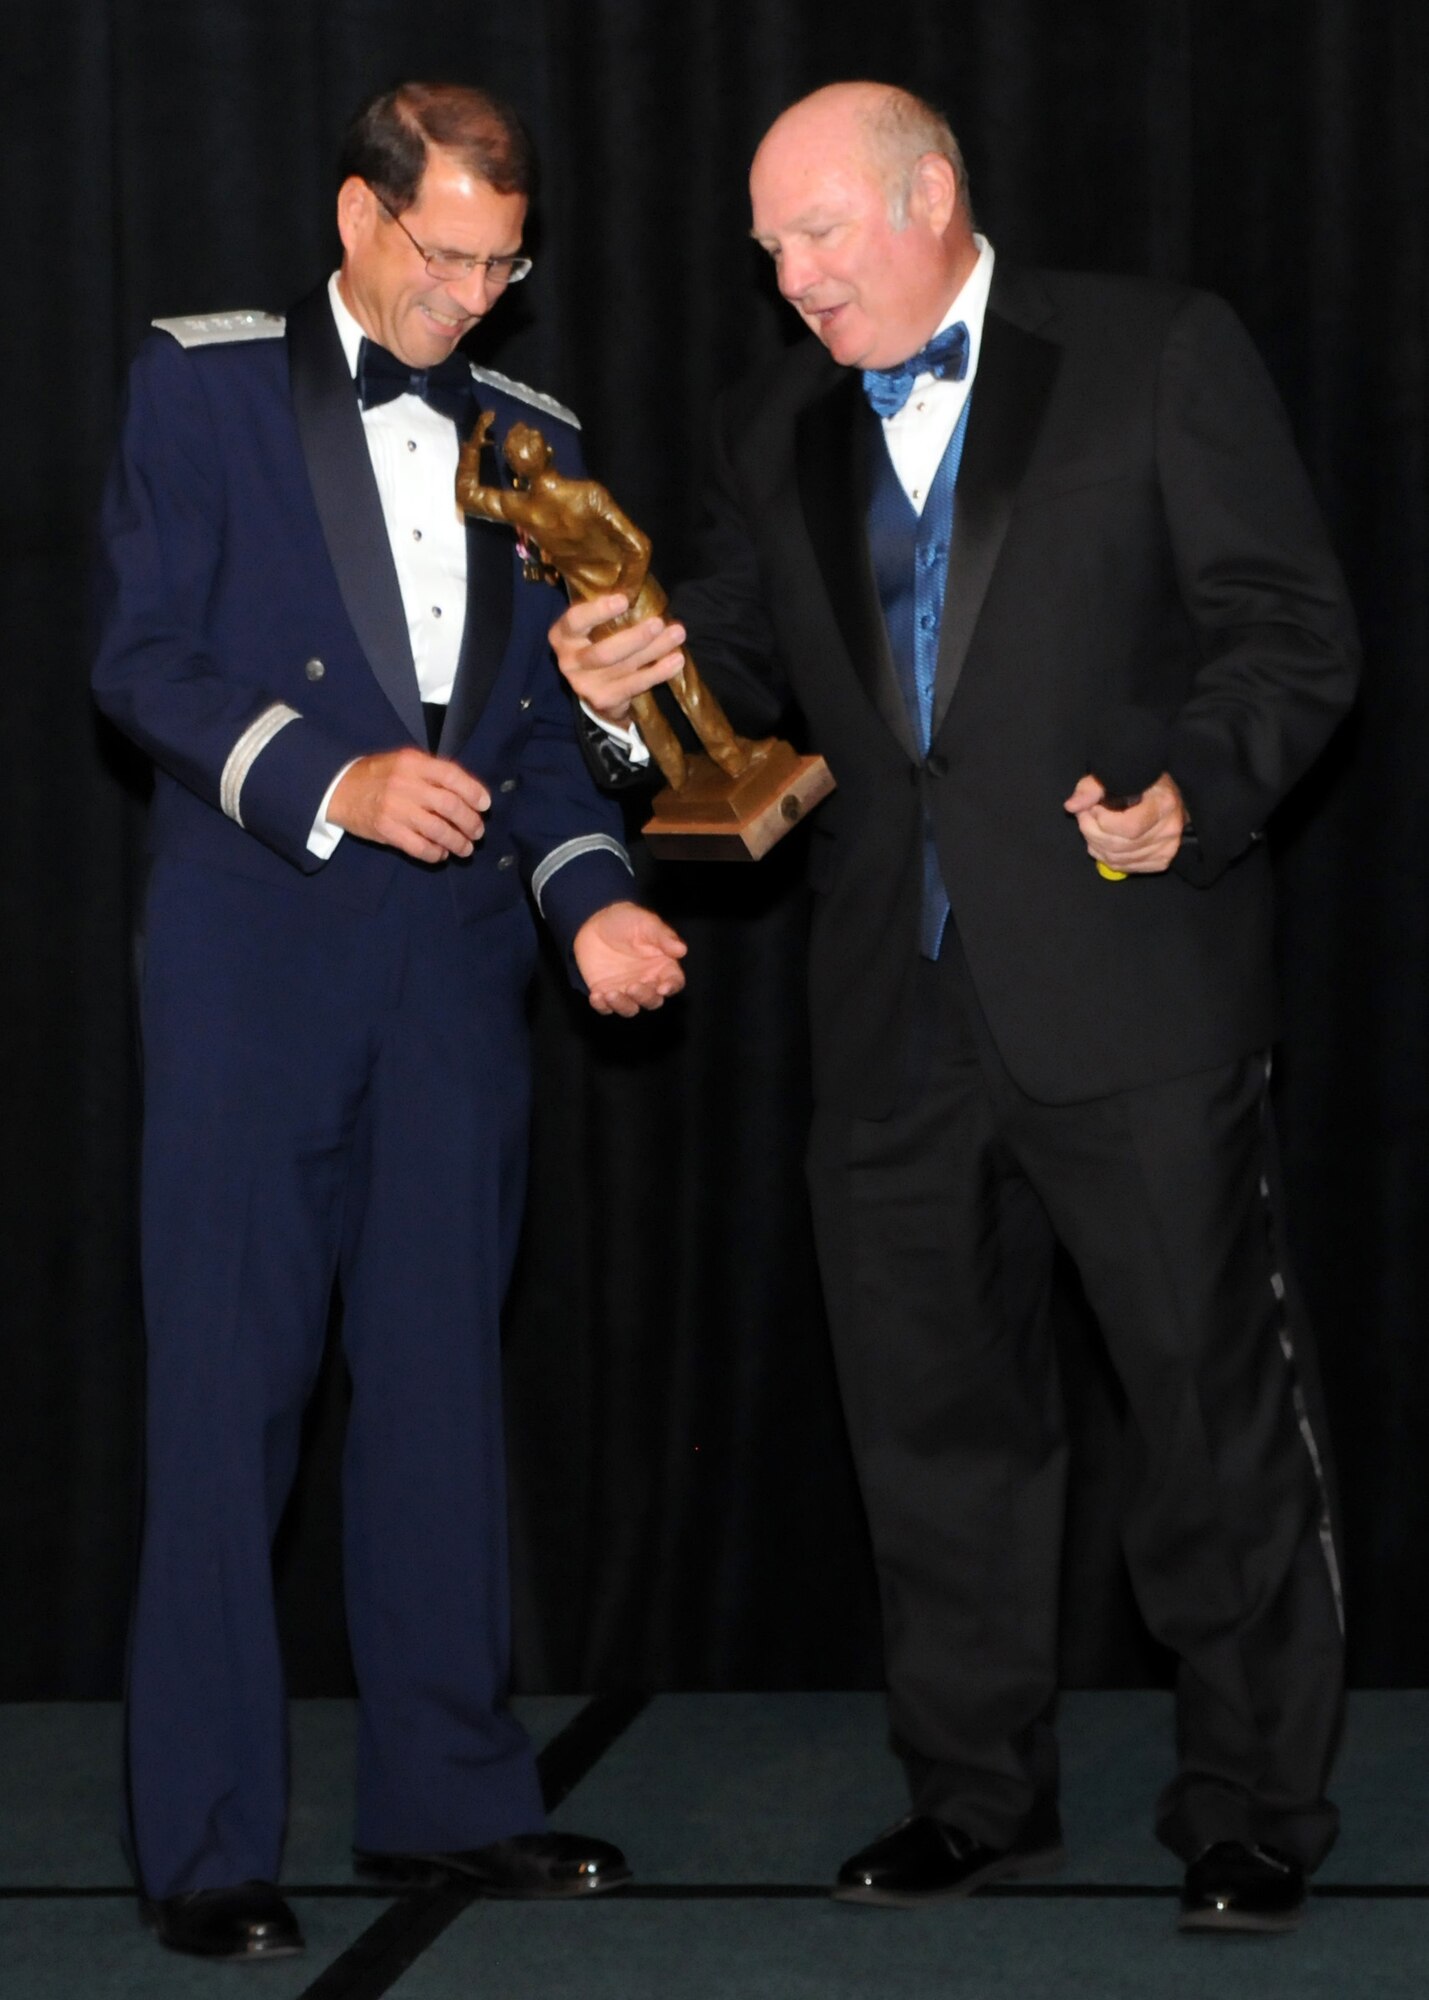 Lt. Gen. Tom Sheridan, SMC commander, accepts  the General Bernard A. Schriever  Award from the chapter’s  Chairman of the Board, Retired Maj. Gen. Thomas Taverney, at the 36th annual AFA Salute to SMC, June 25. Hosted by AFA’s General Bernard A. Schriever chapter, this year’s awards event was held at the Los Angeles Airport Marriott. (Photo by Jim Gordon)